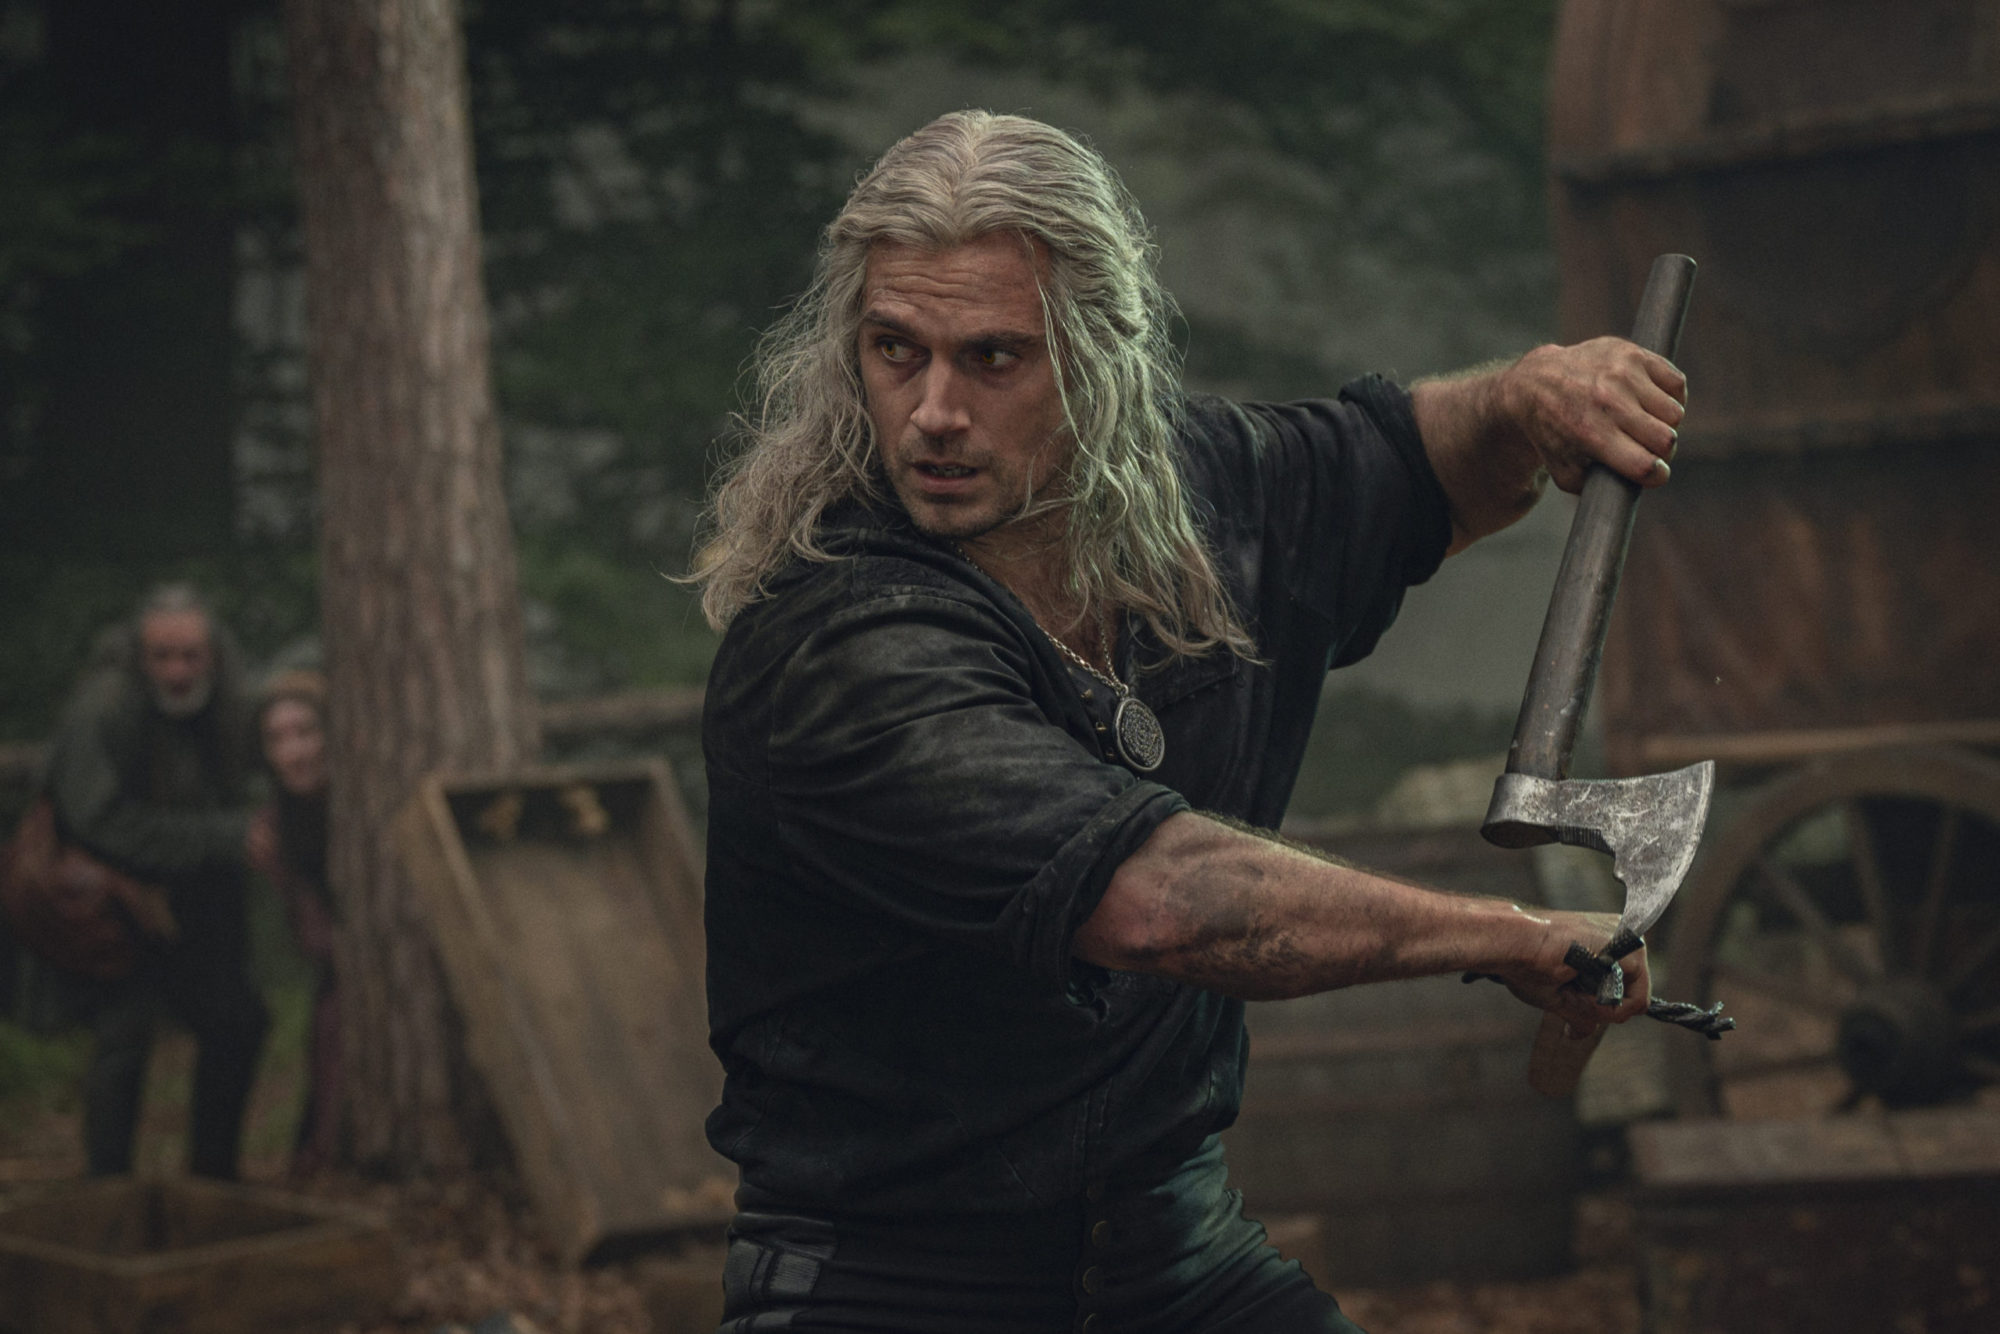 The Witcher' Season 3 Return Dates Set for Two-Part Release